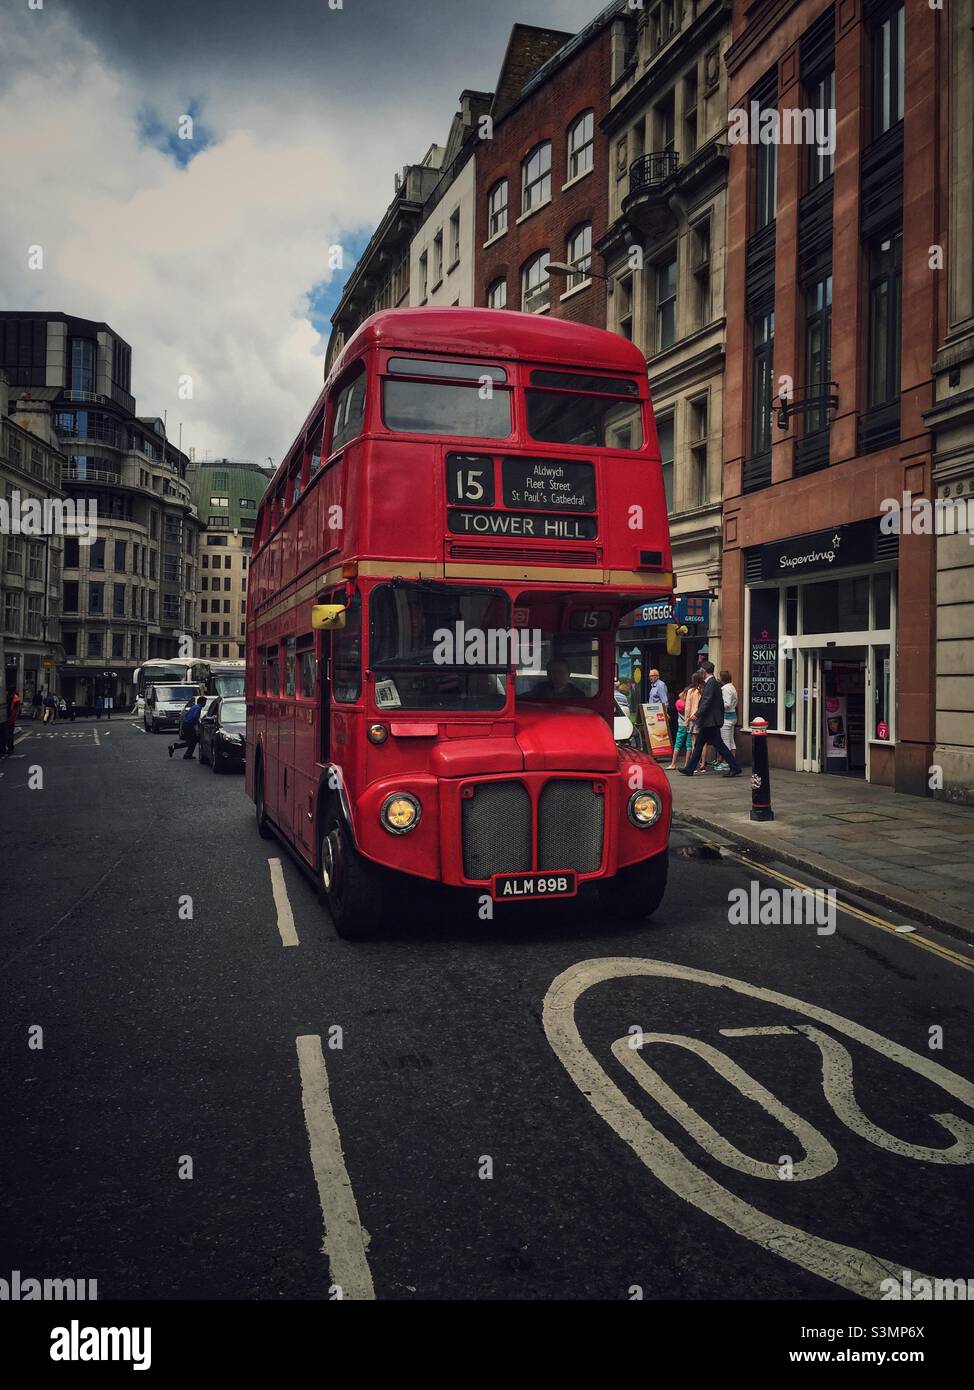 Old traditional red double decker bus on a London street. Stock Photo